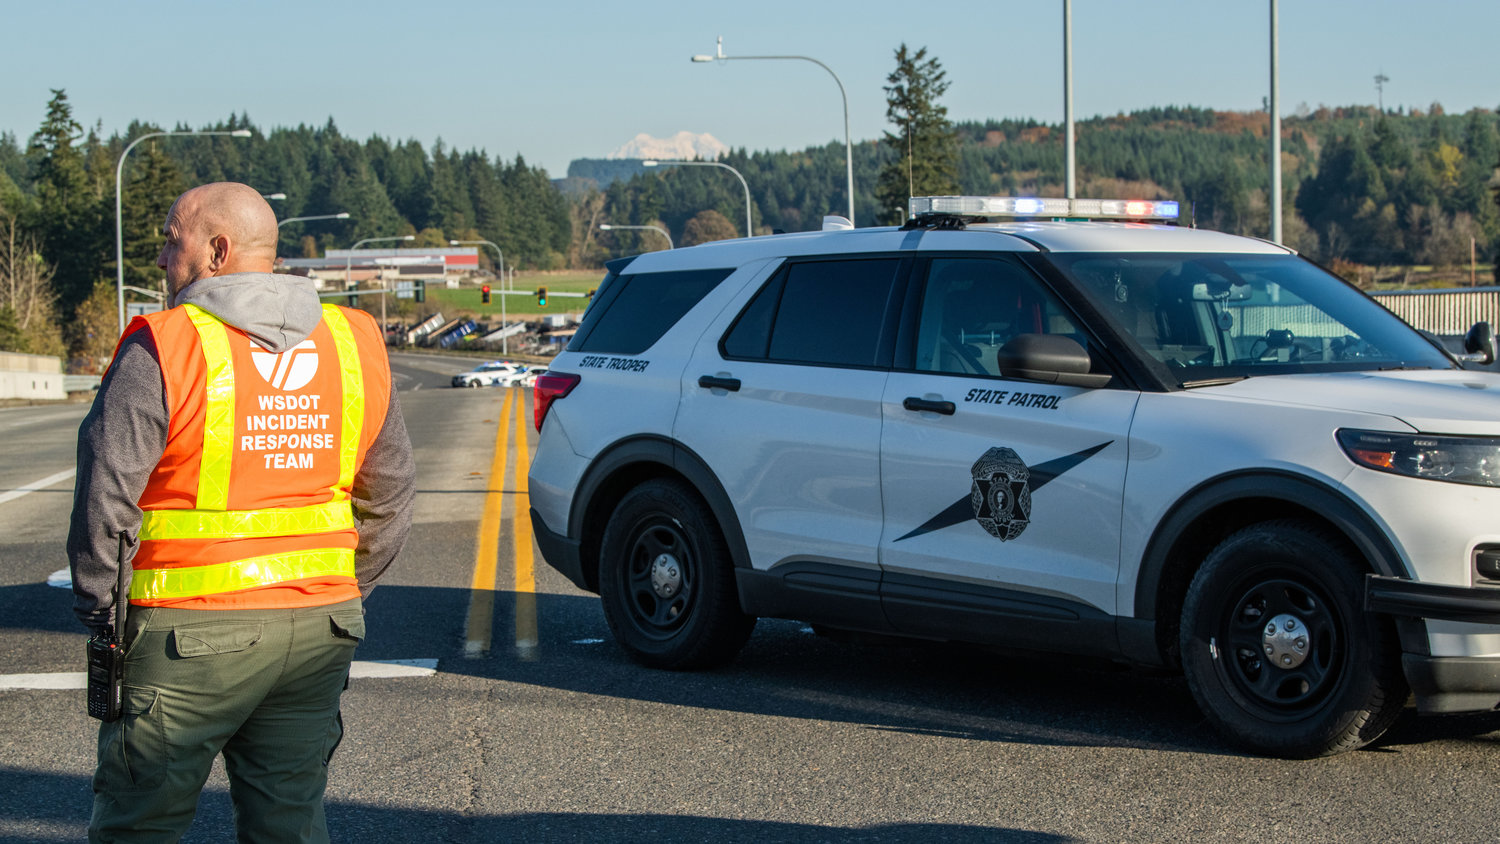 Incident Response Supervisor Shane Inman, with the Washington State Department of Transportation, watches as law enforcement investigates an officer involved shooting near Grand Mound on Monday.